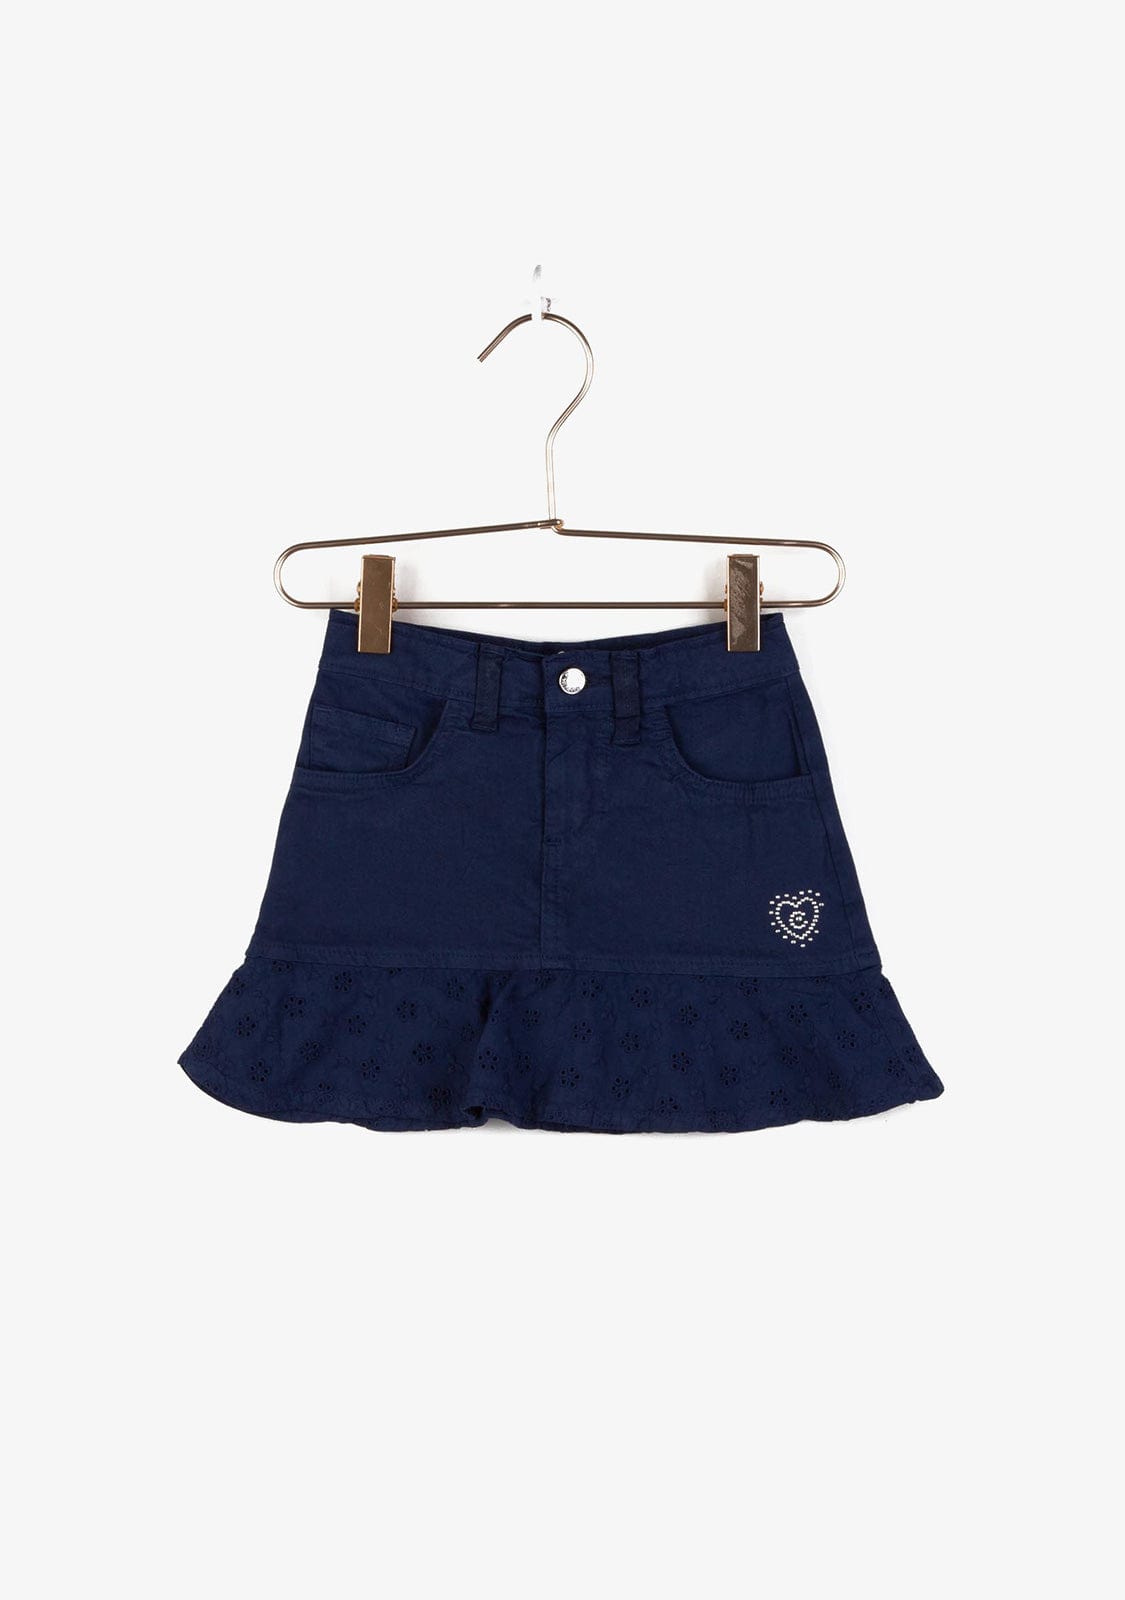 CONGUITOS TEXTIL Clothing Girl's Navy Ruffled Flared Skirt